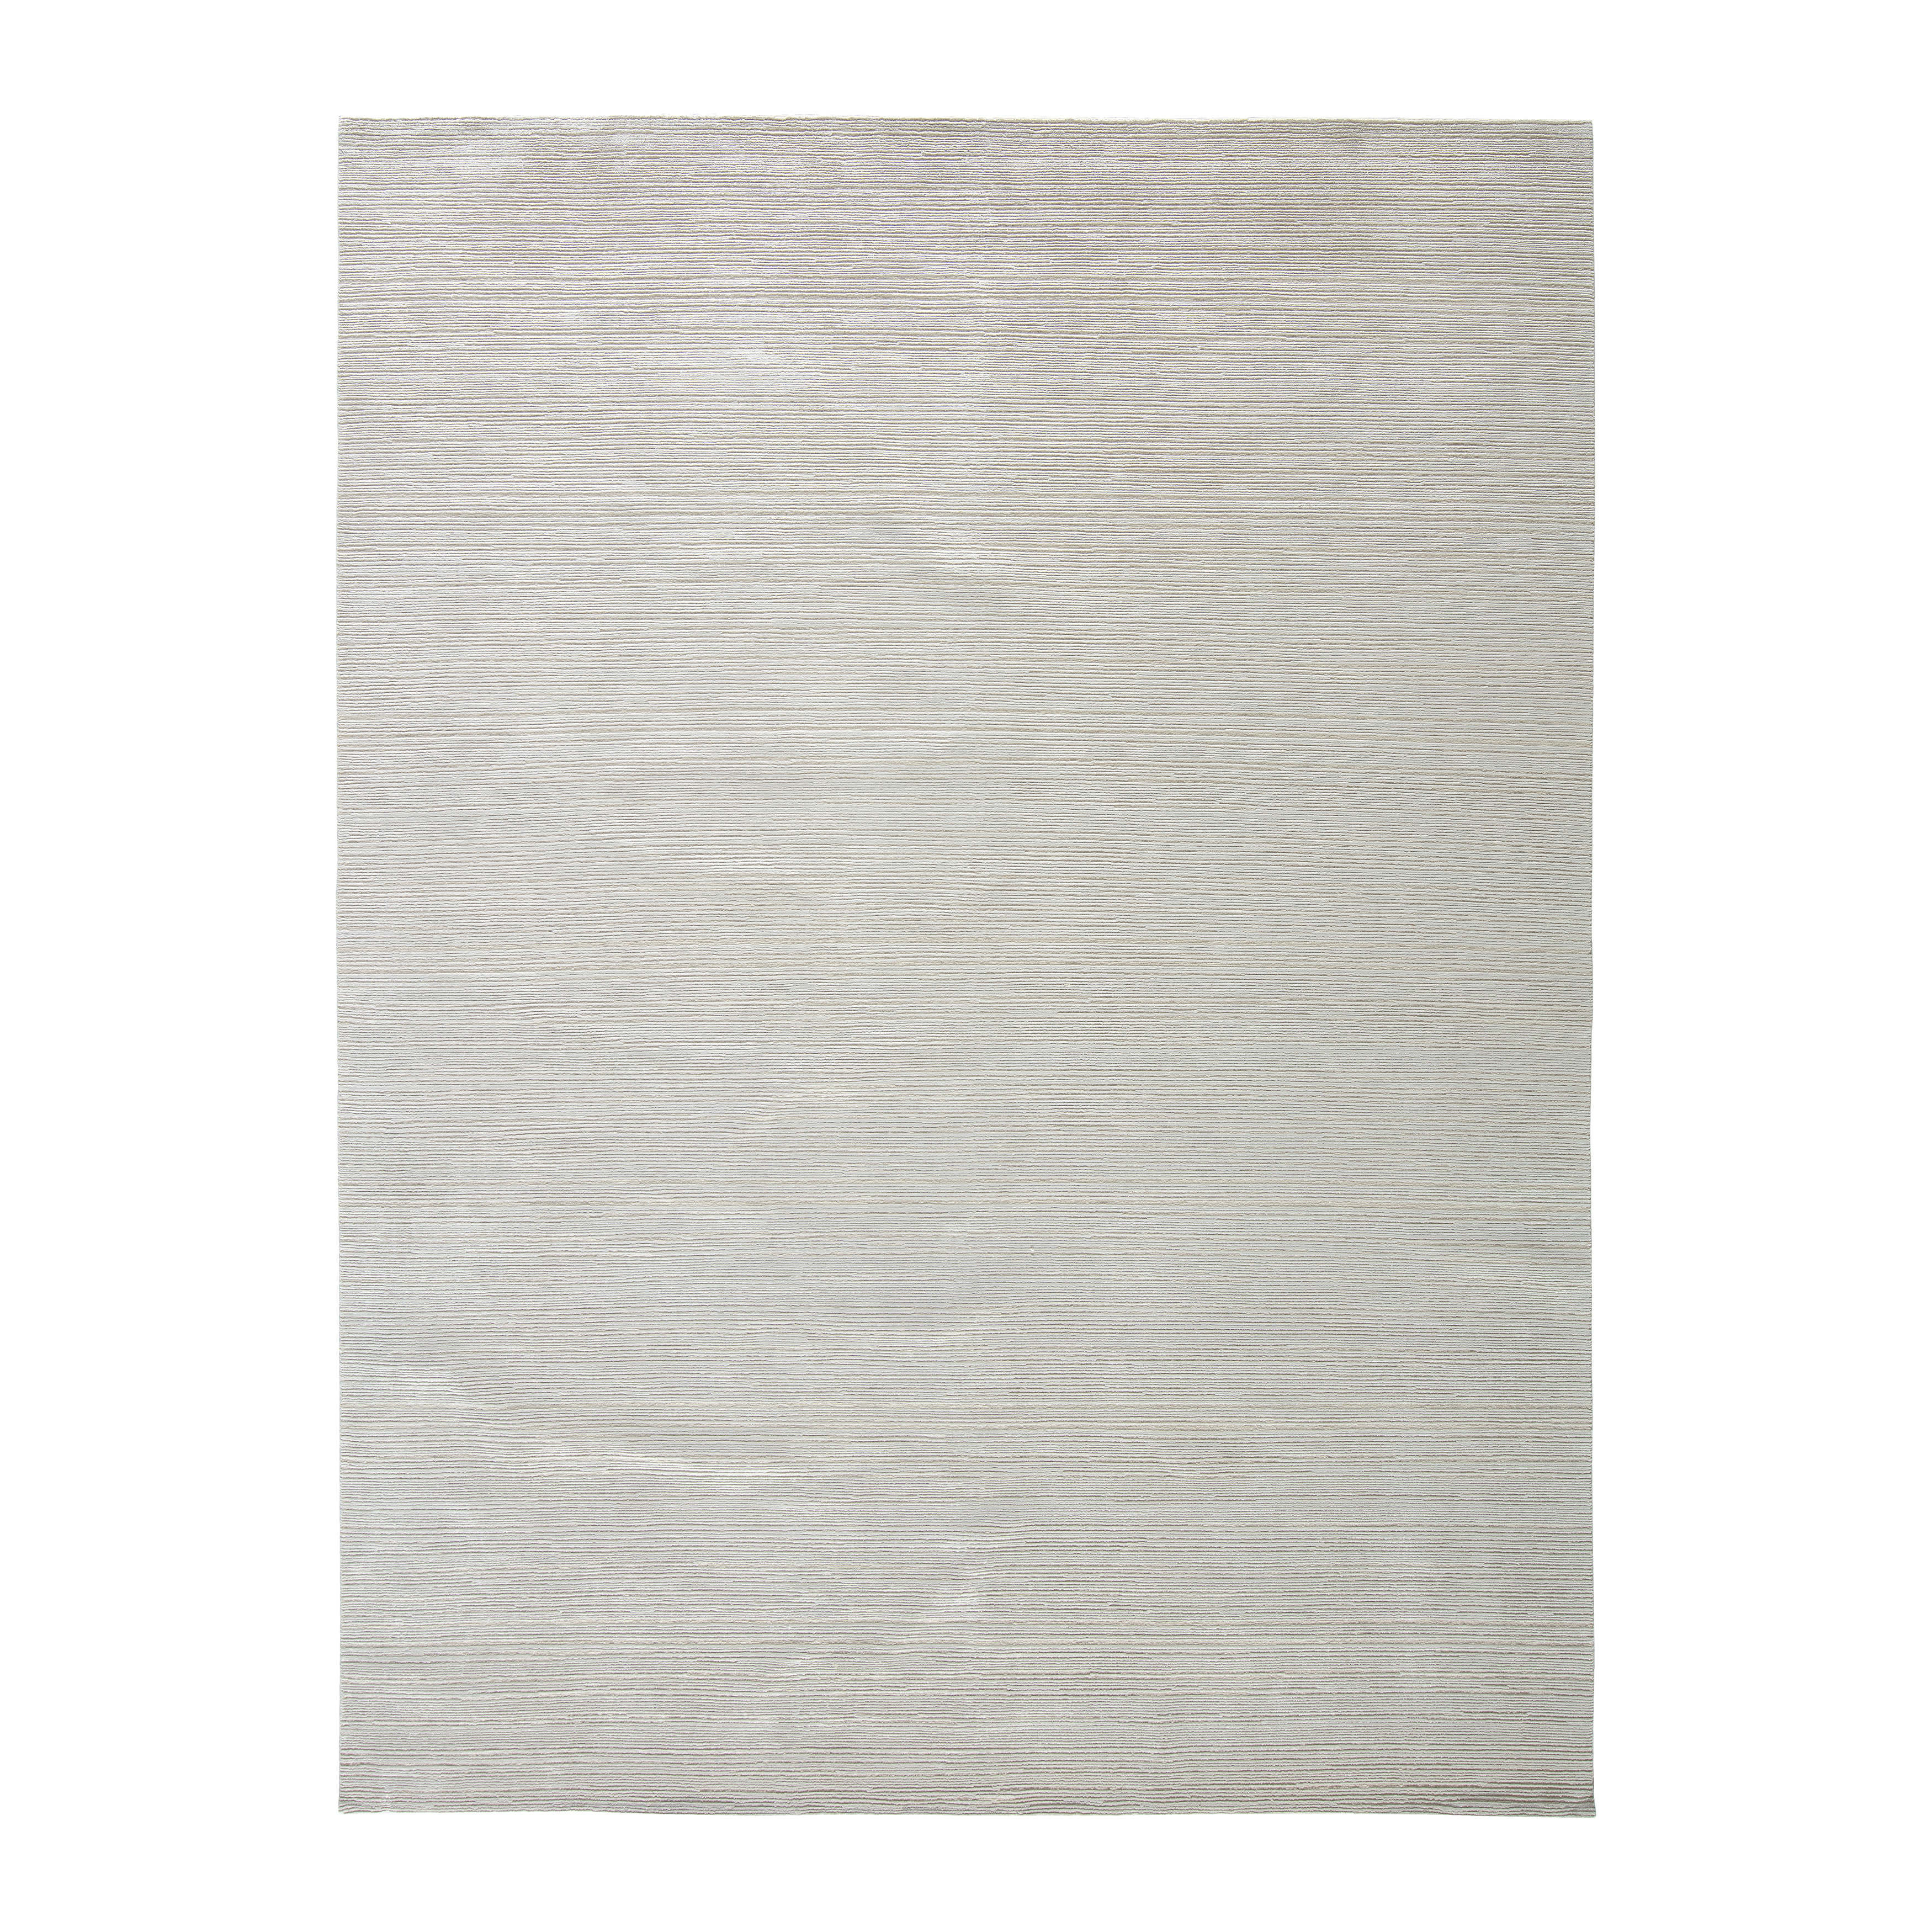 Our Staggered rug is hand-knotted made of wool and pure silk.